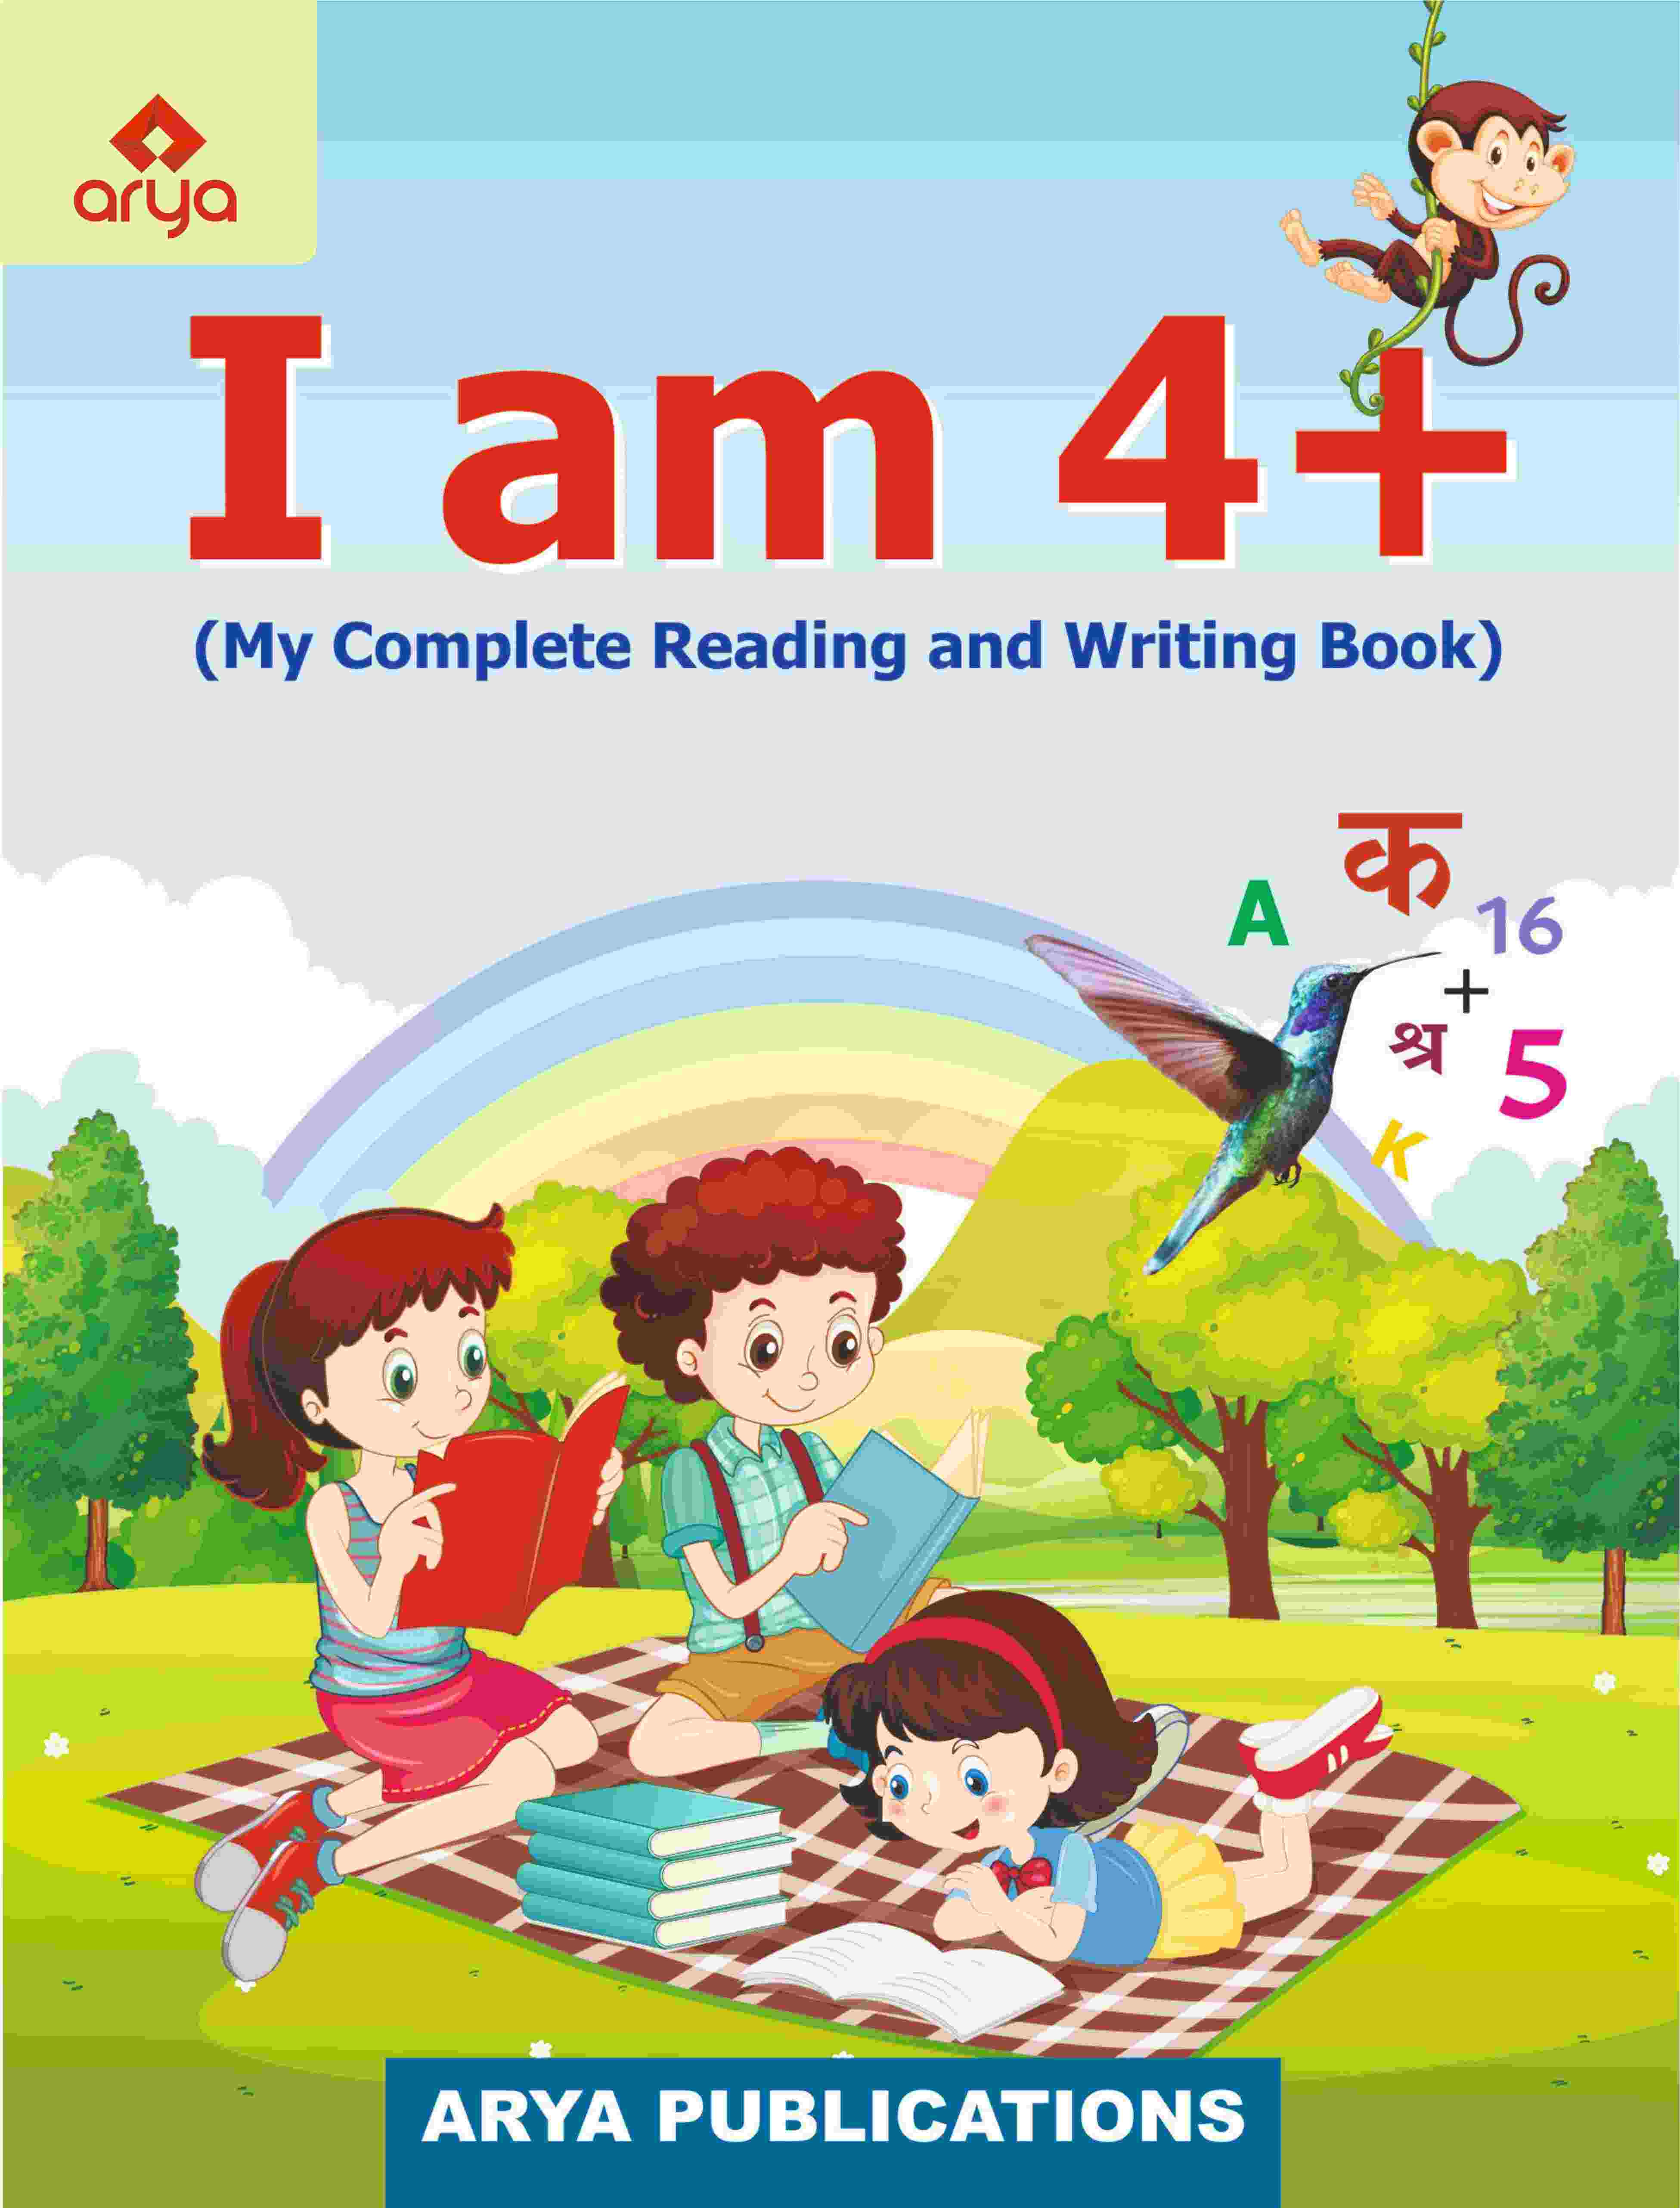 I Am 4+ (My Complete Reading and Writing Book)